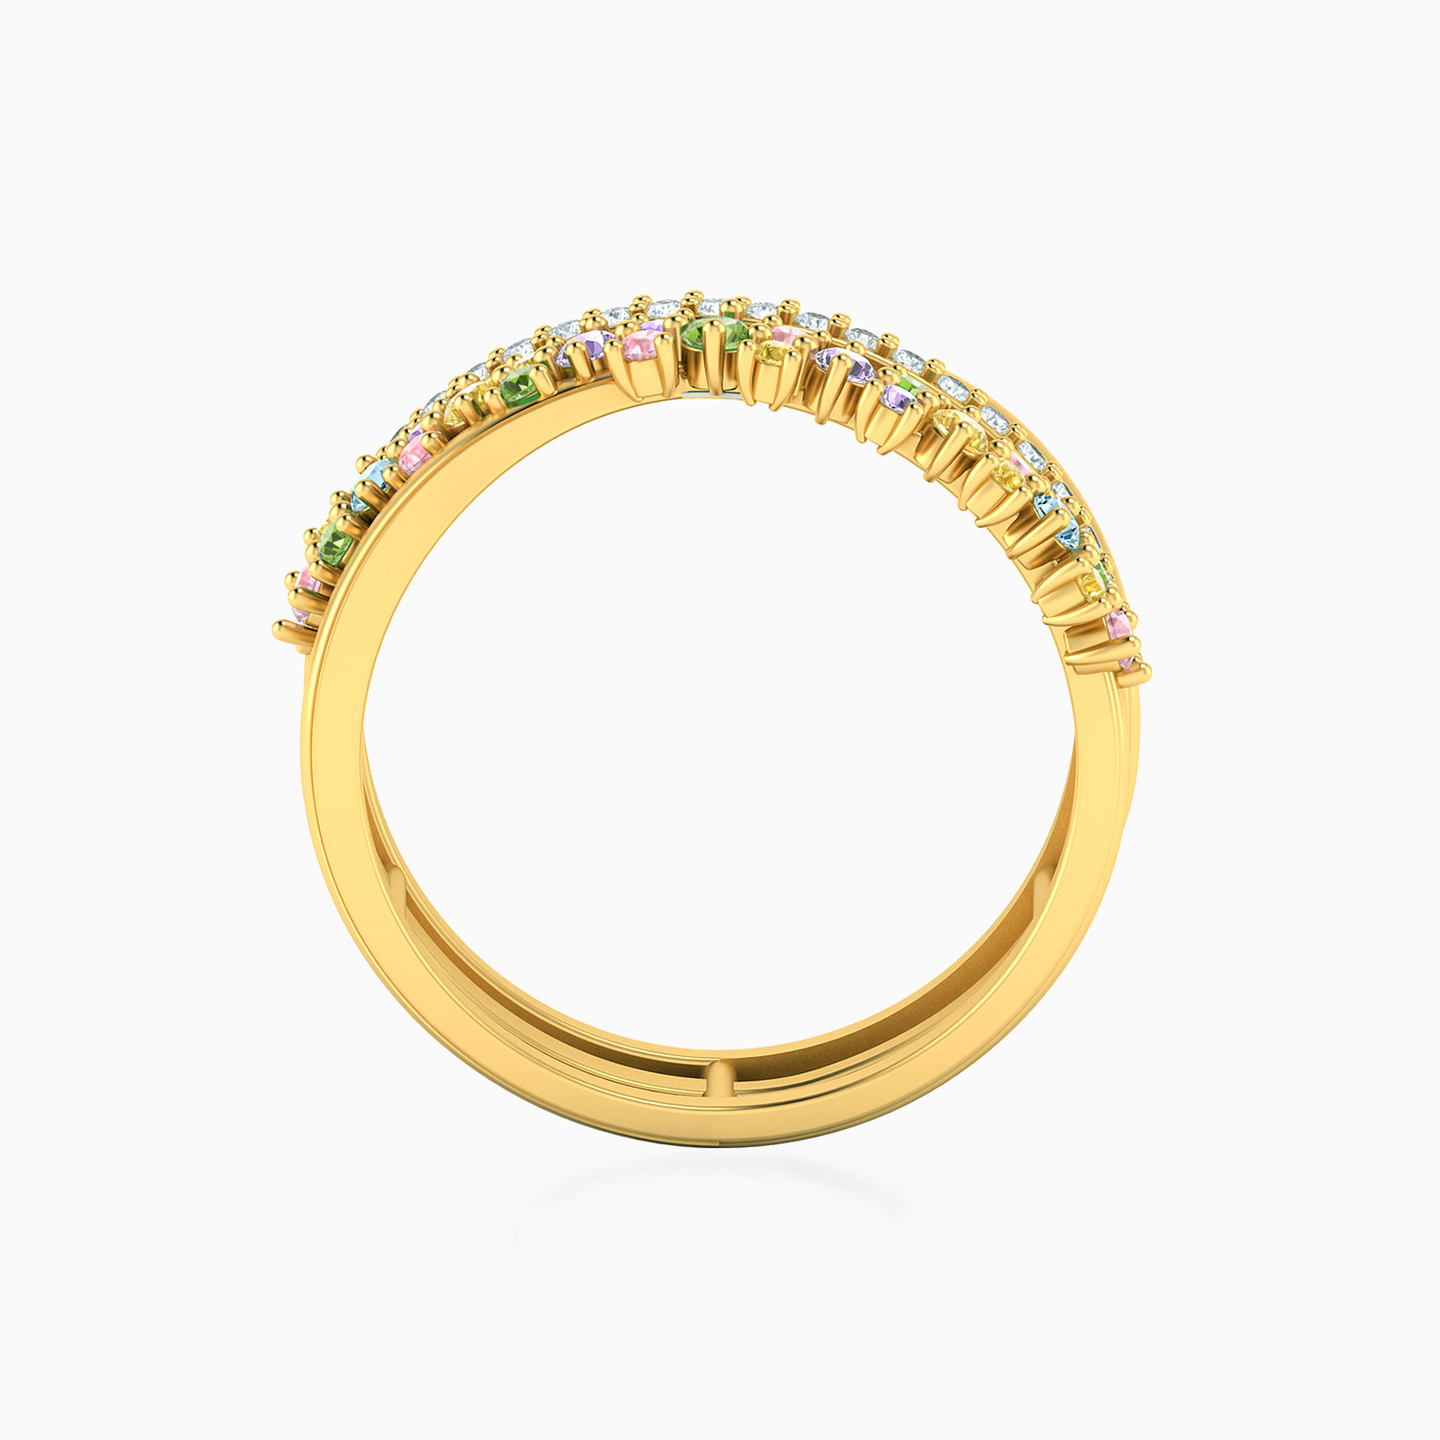 18K Gold Colored Stones Band Ring - 3